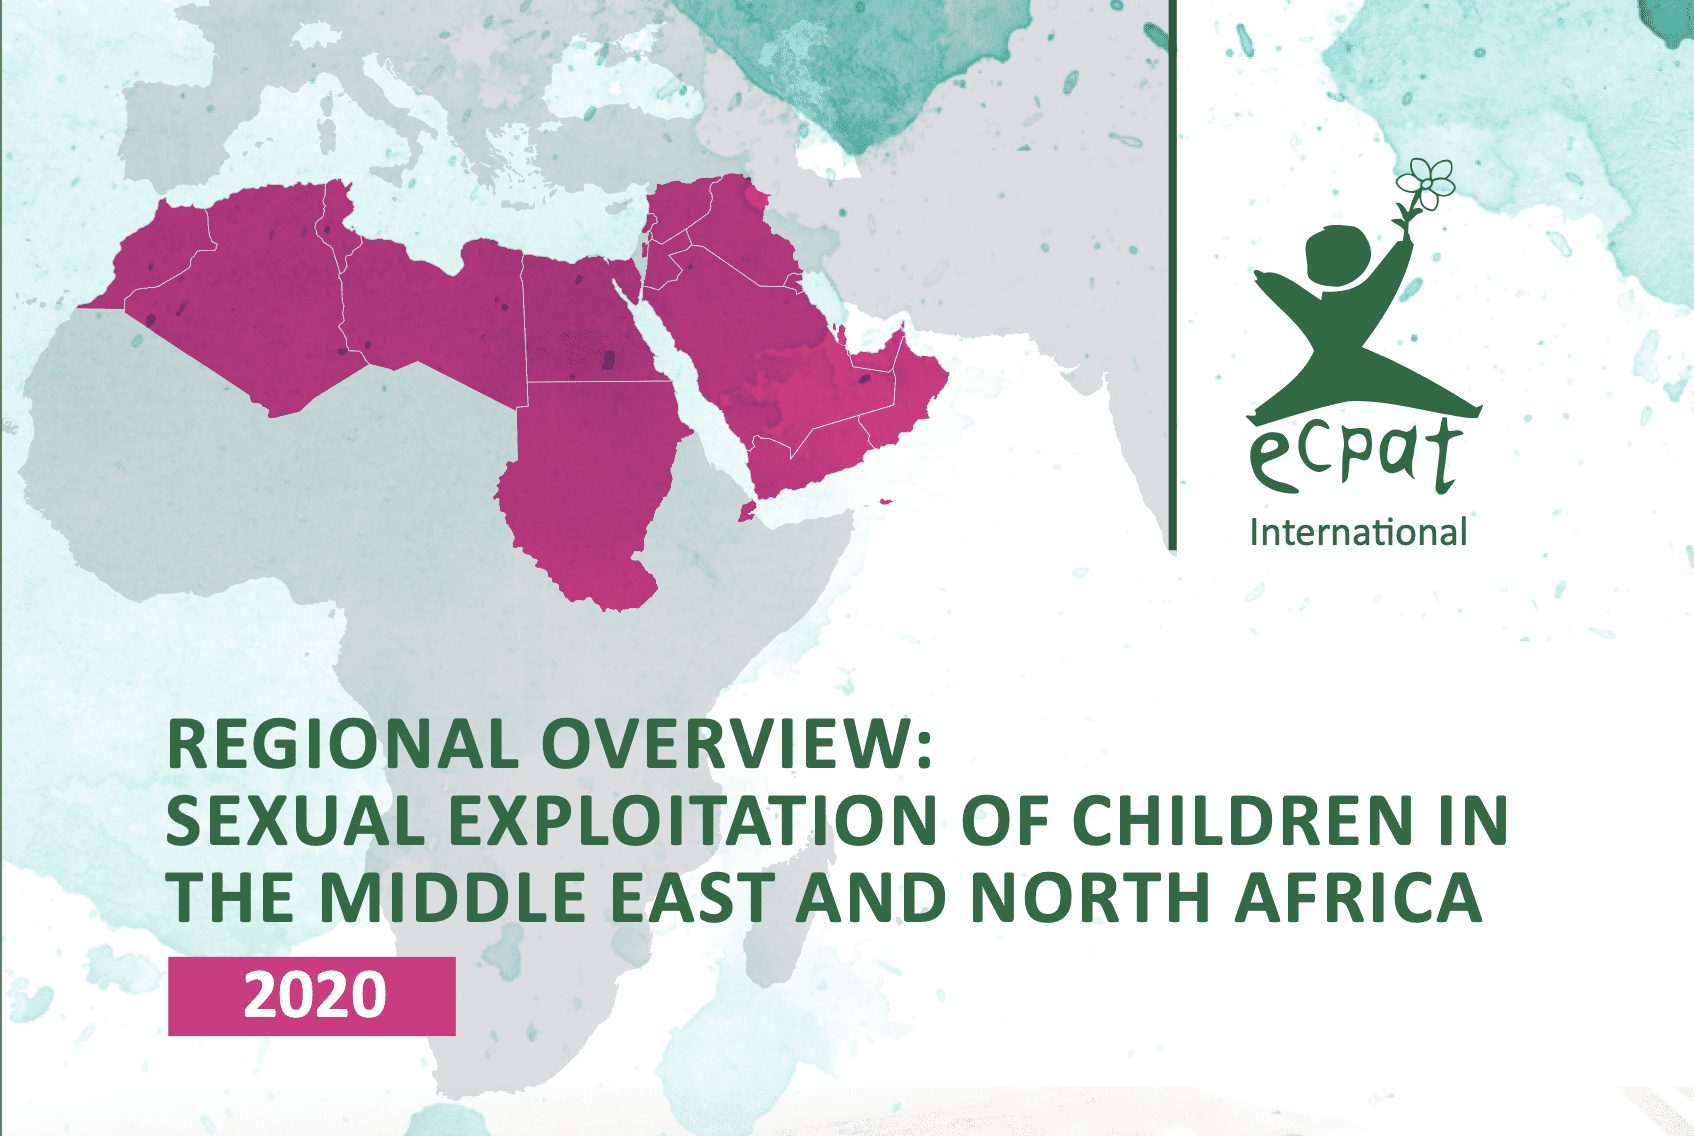 Regional Overview: Sexual Exploitation of Children in the Middle East and North Africa